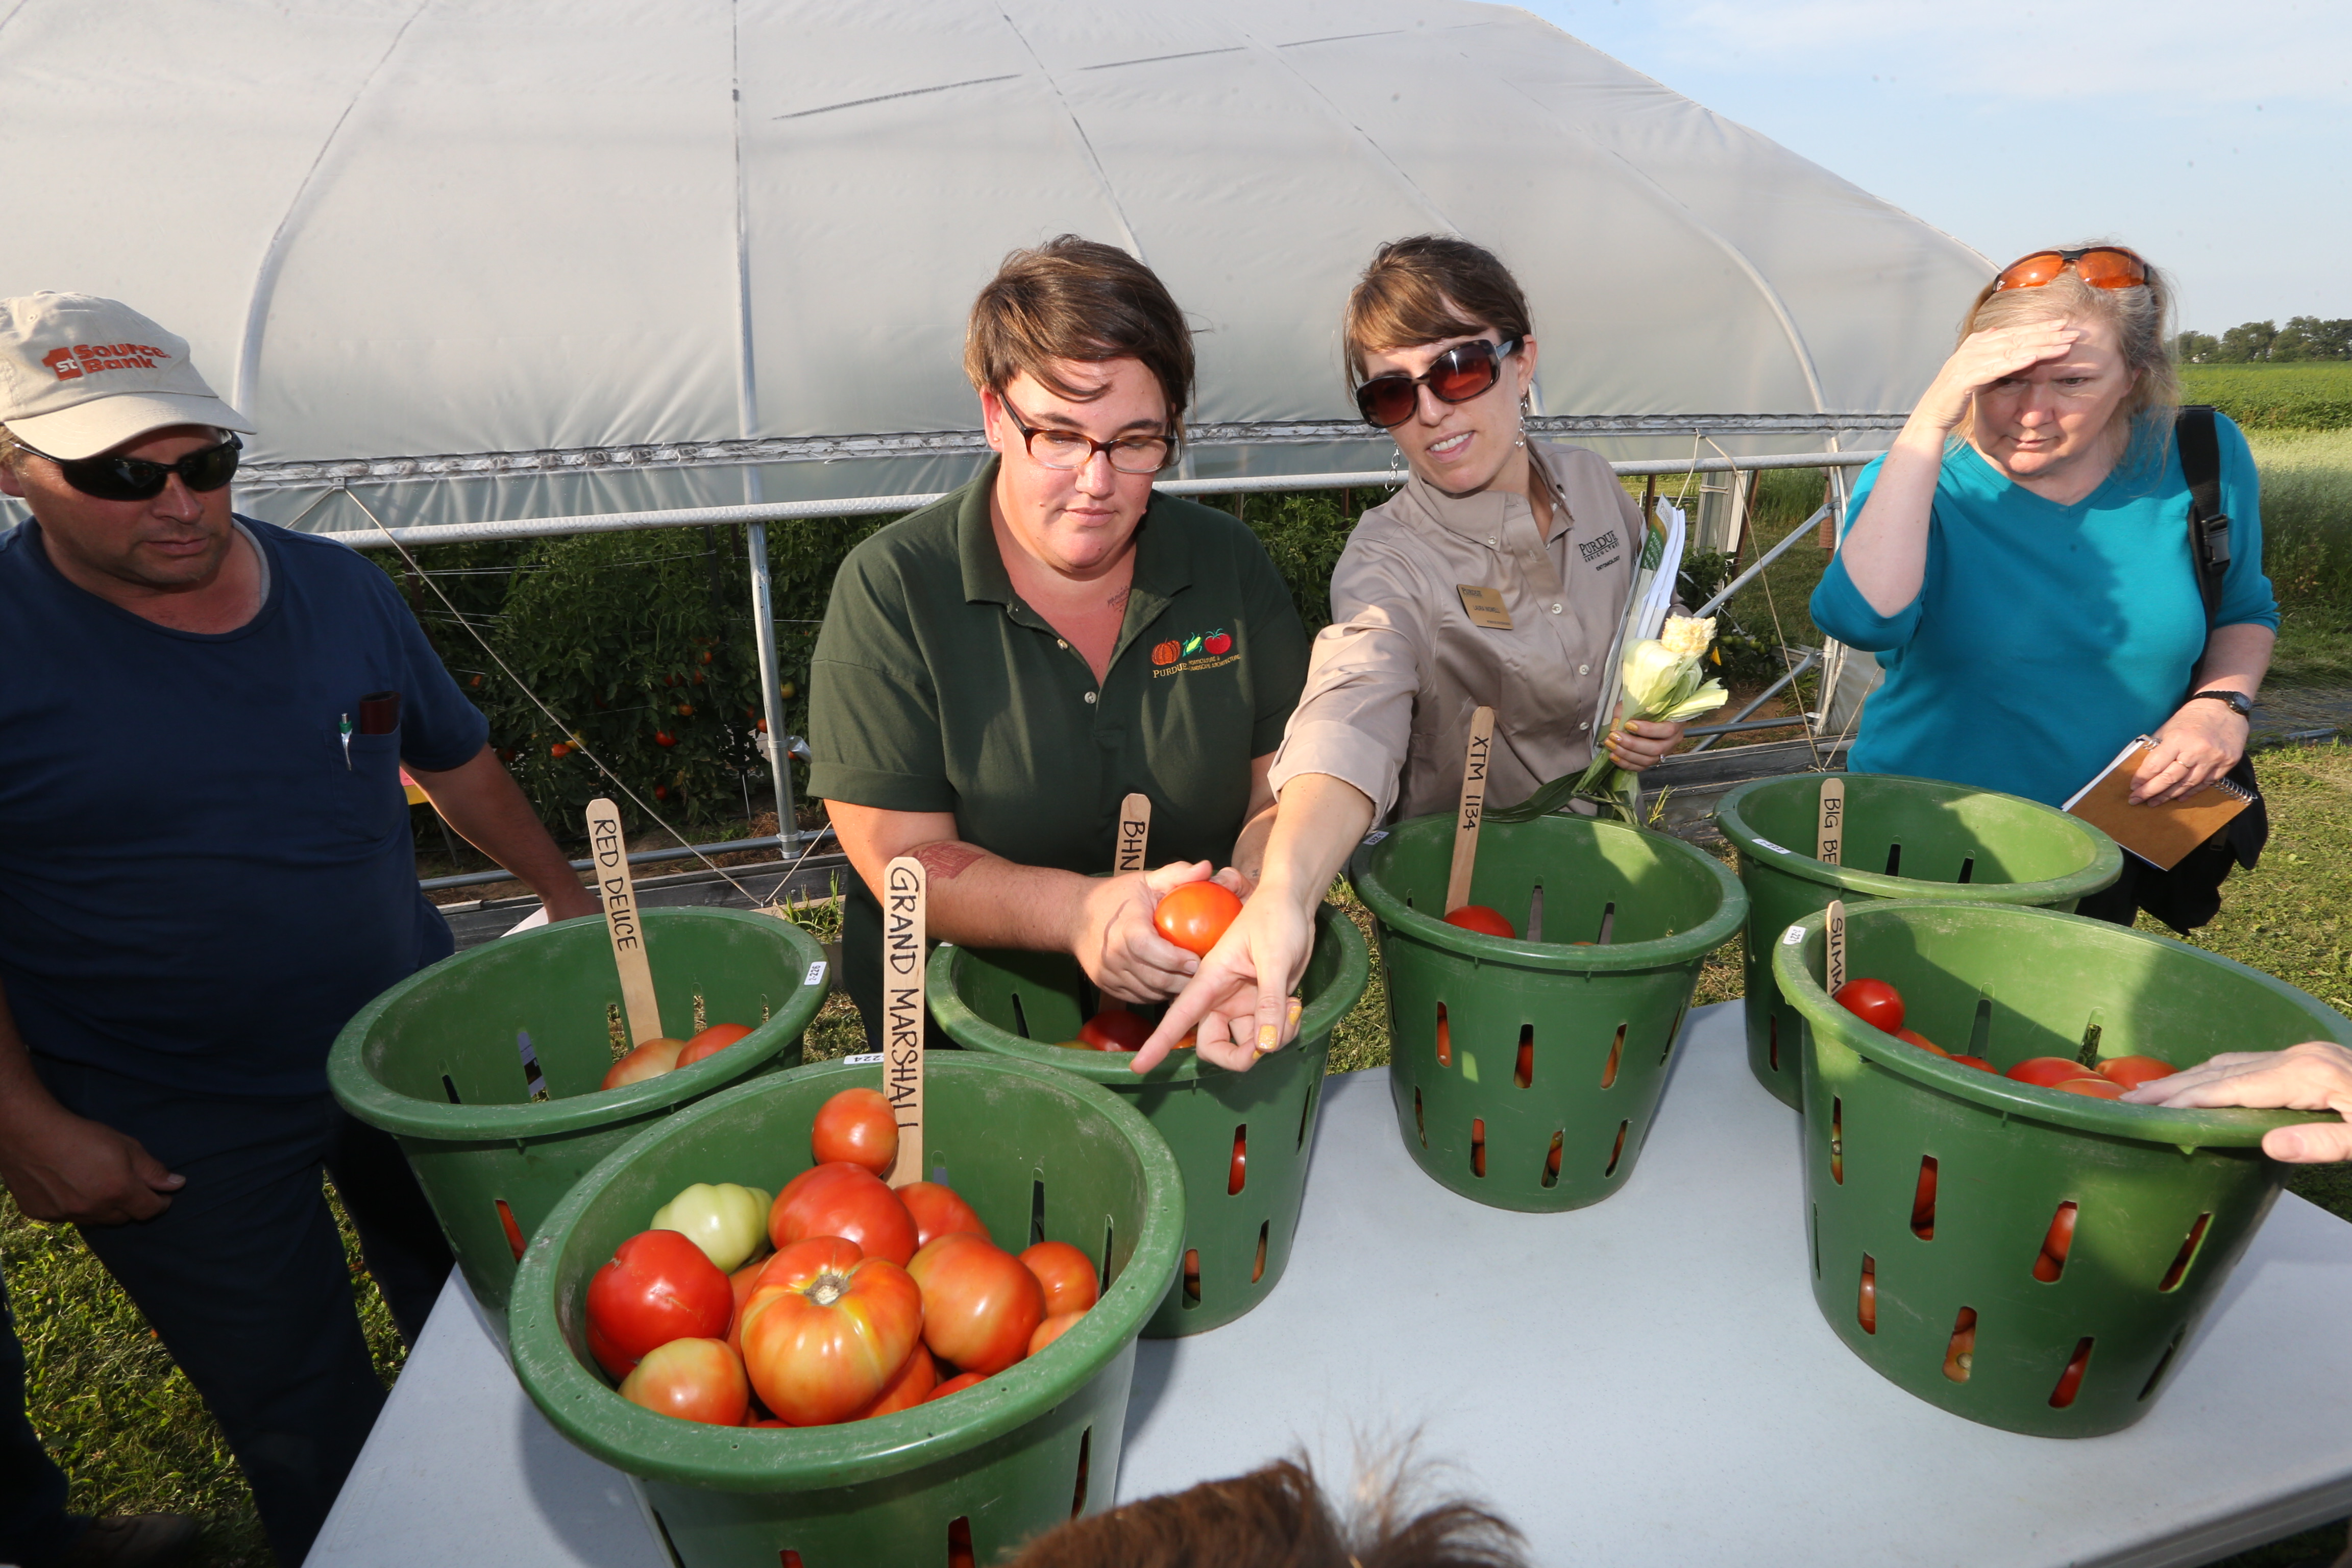 Tomato tasting at a field day